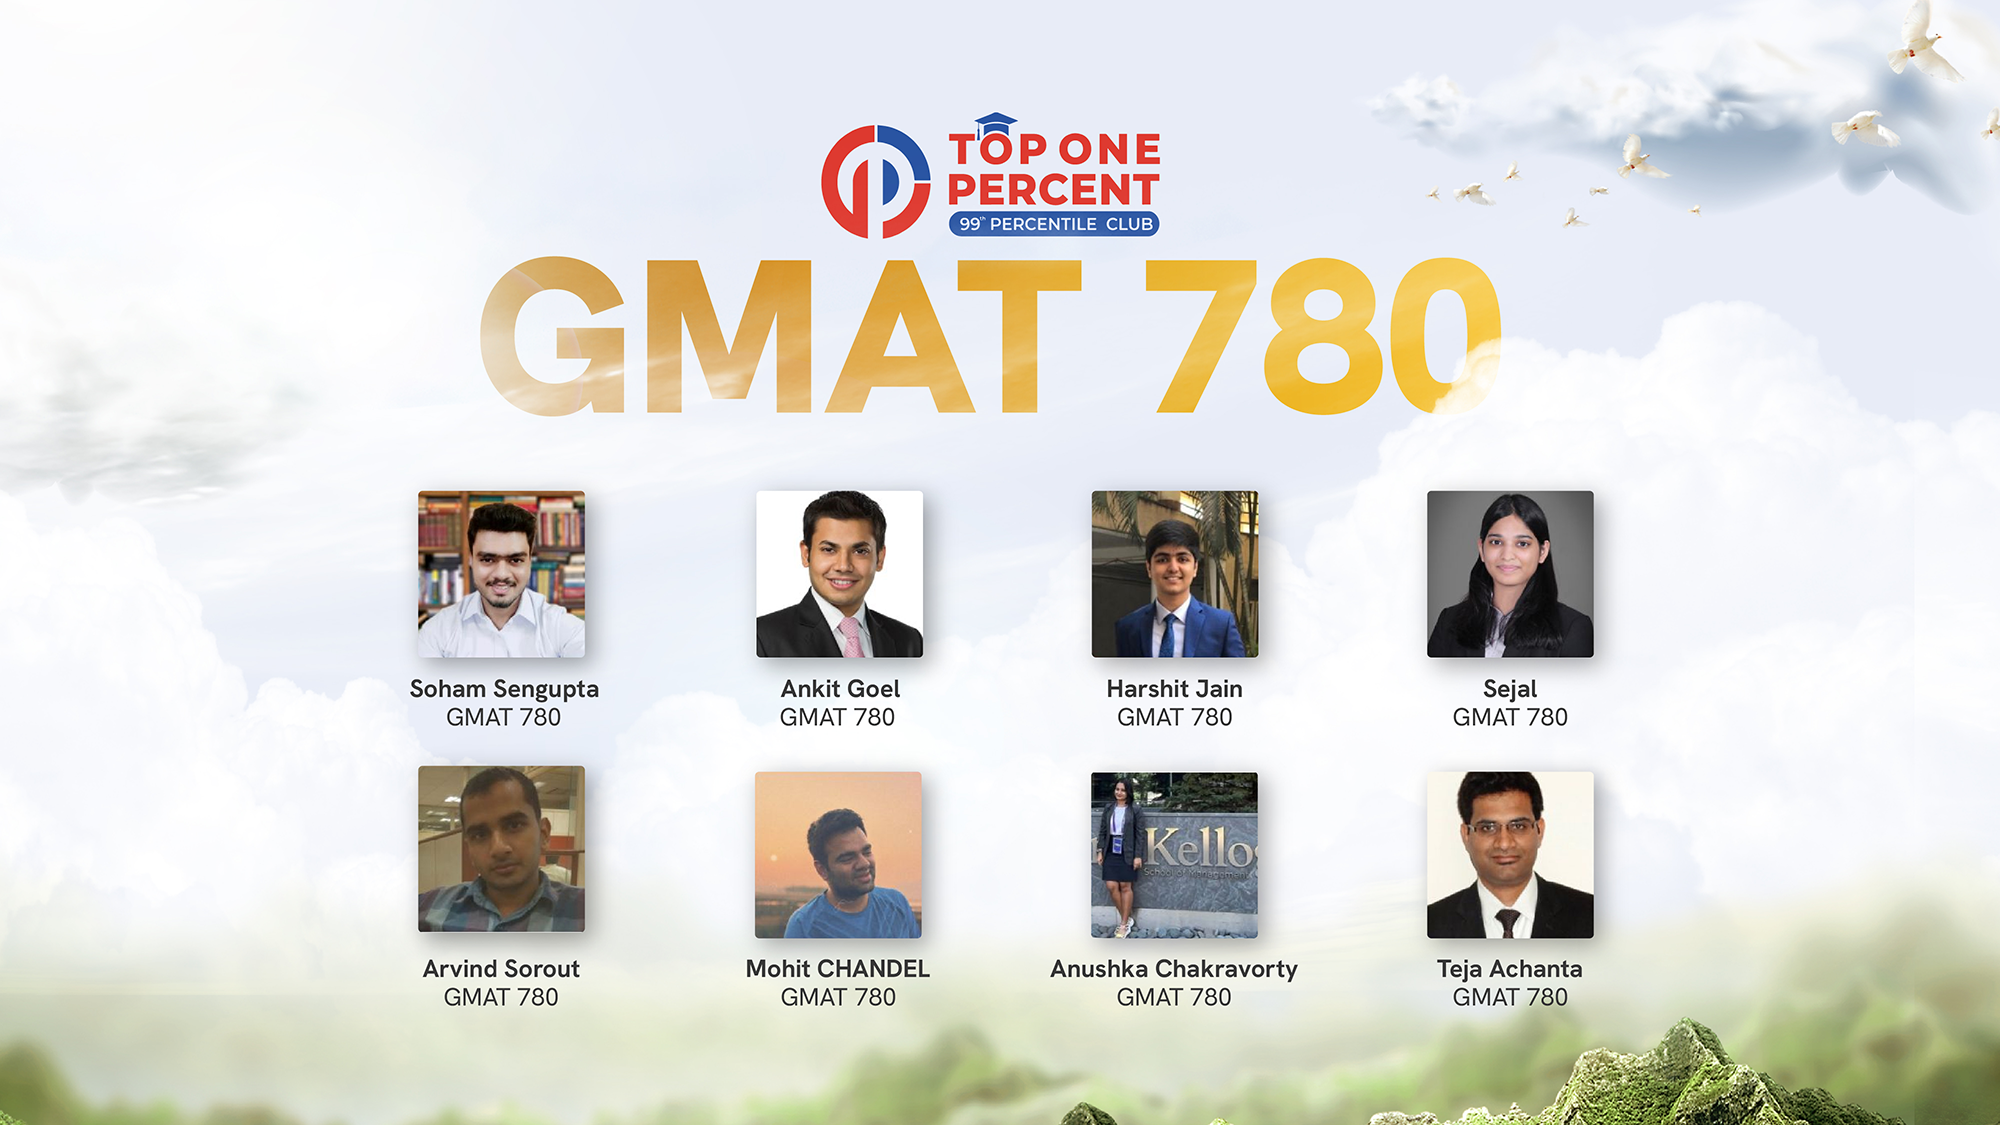 Top One Percent-GMAT/GRE Coaching Classes, Online GMAT/GRE Training ...